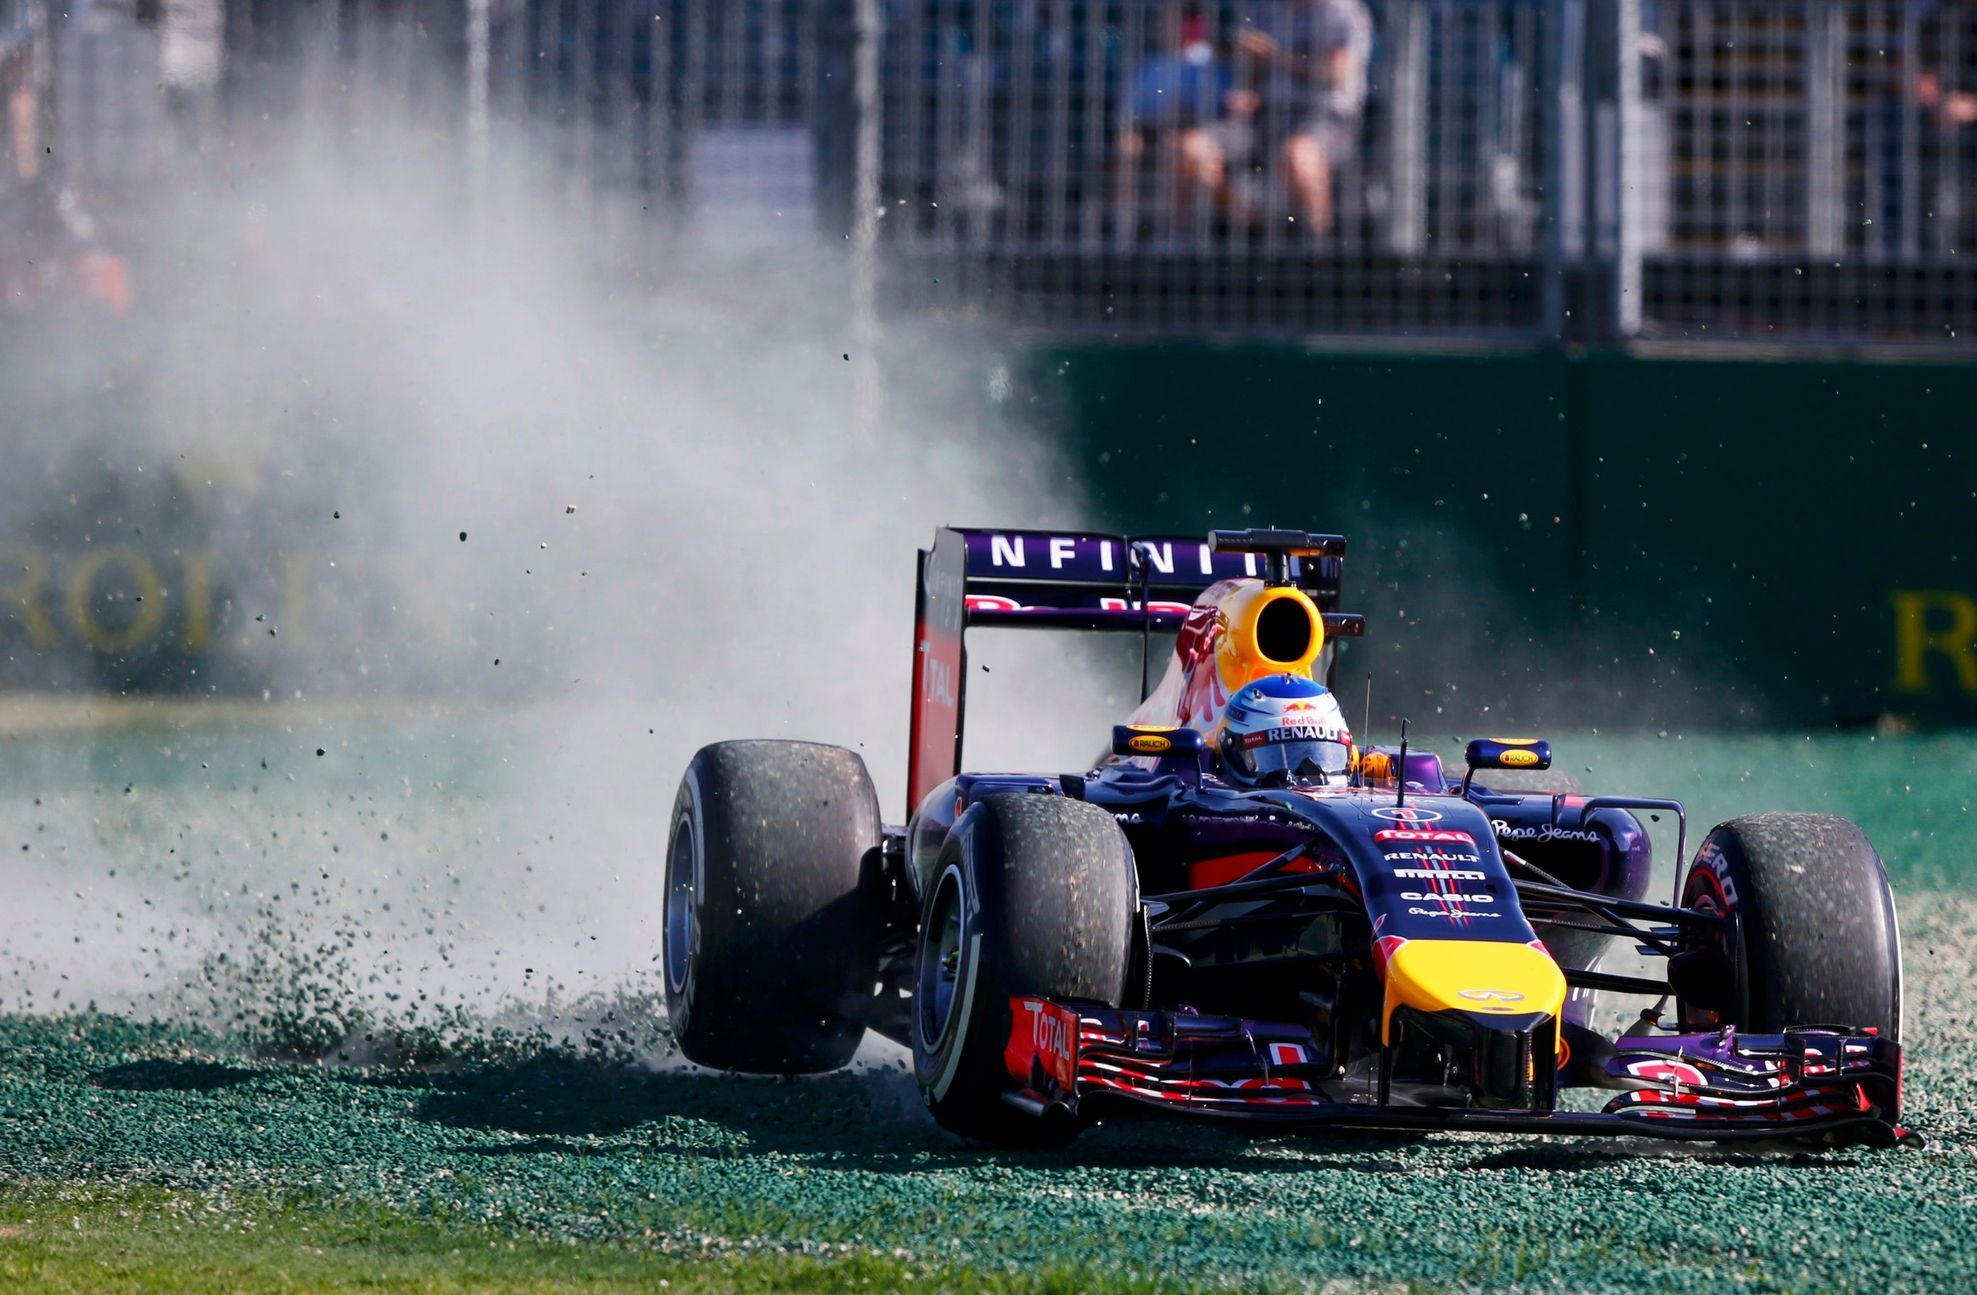 Red Bull Formula One driver Vettel of Germany drives into the gravel during the second practice session of the Australian F1 Grand Prix in Melbourne